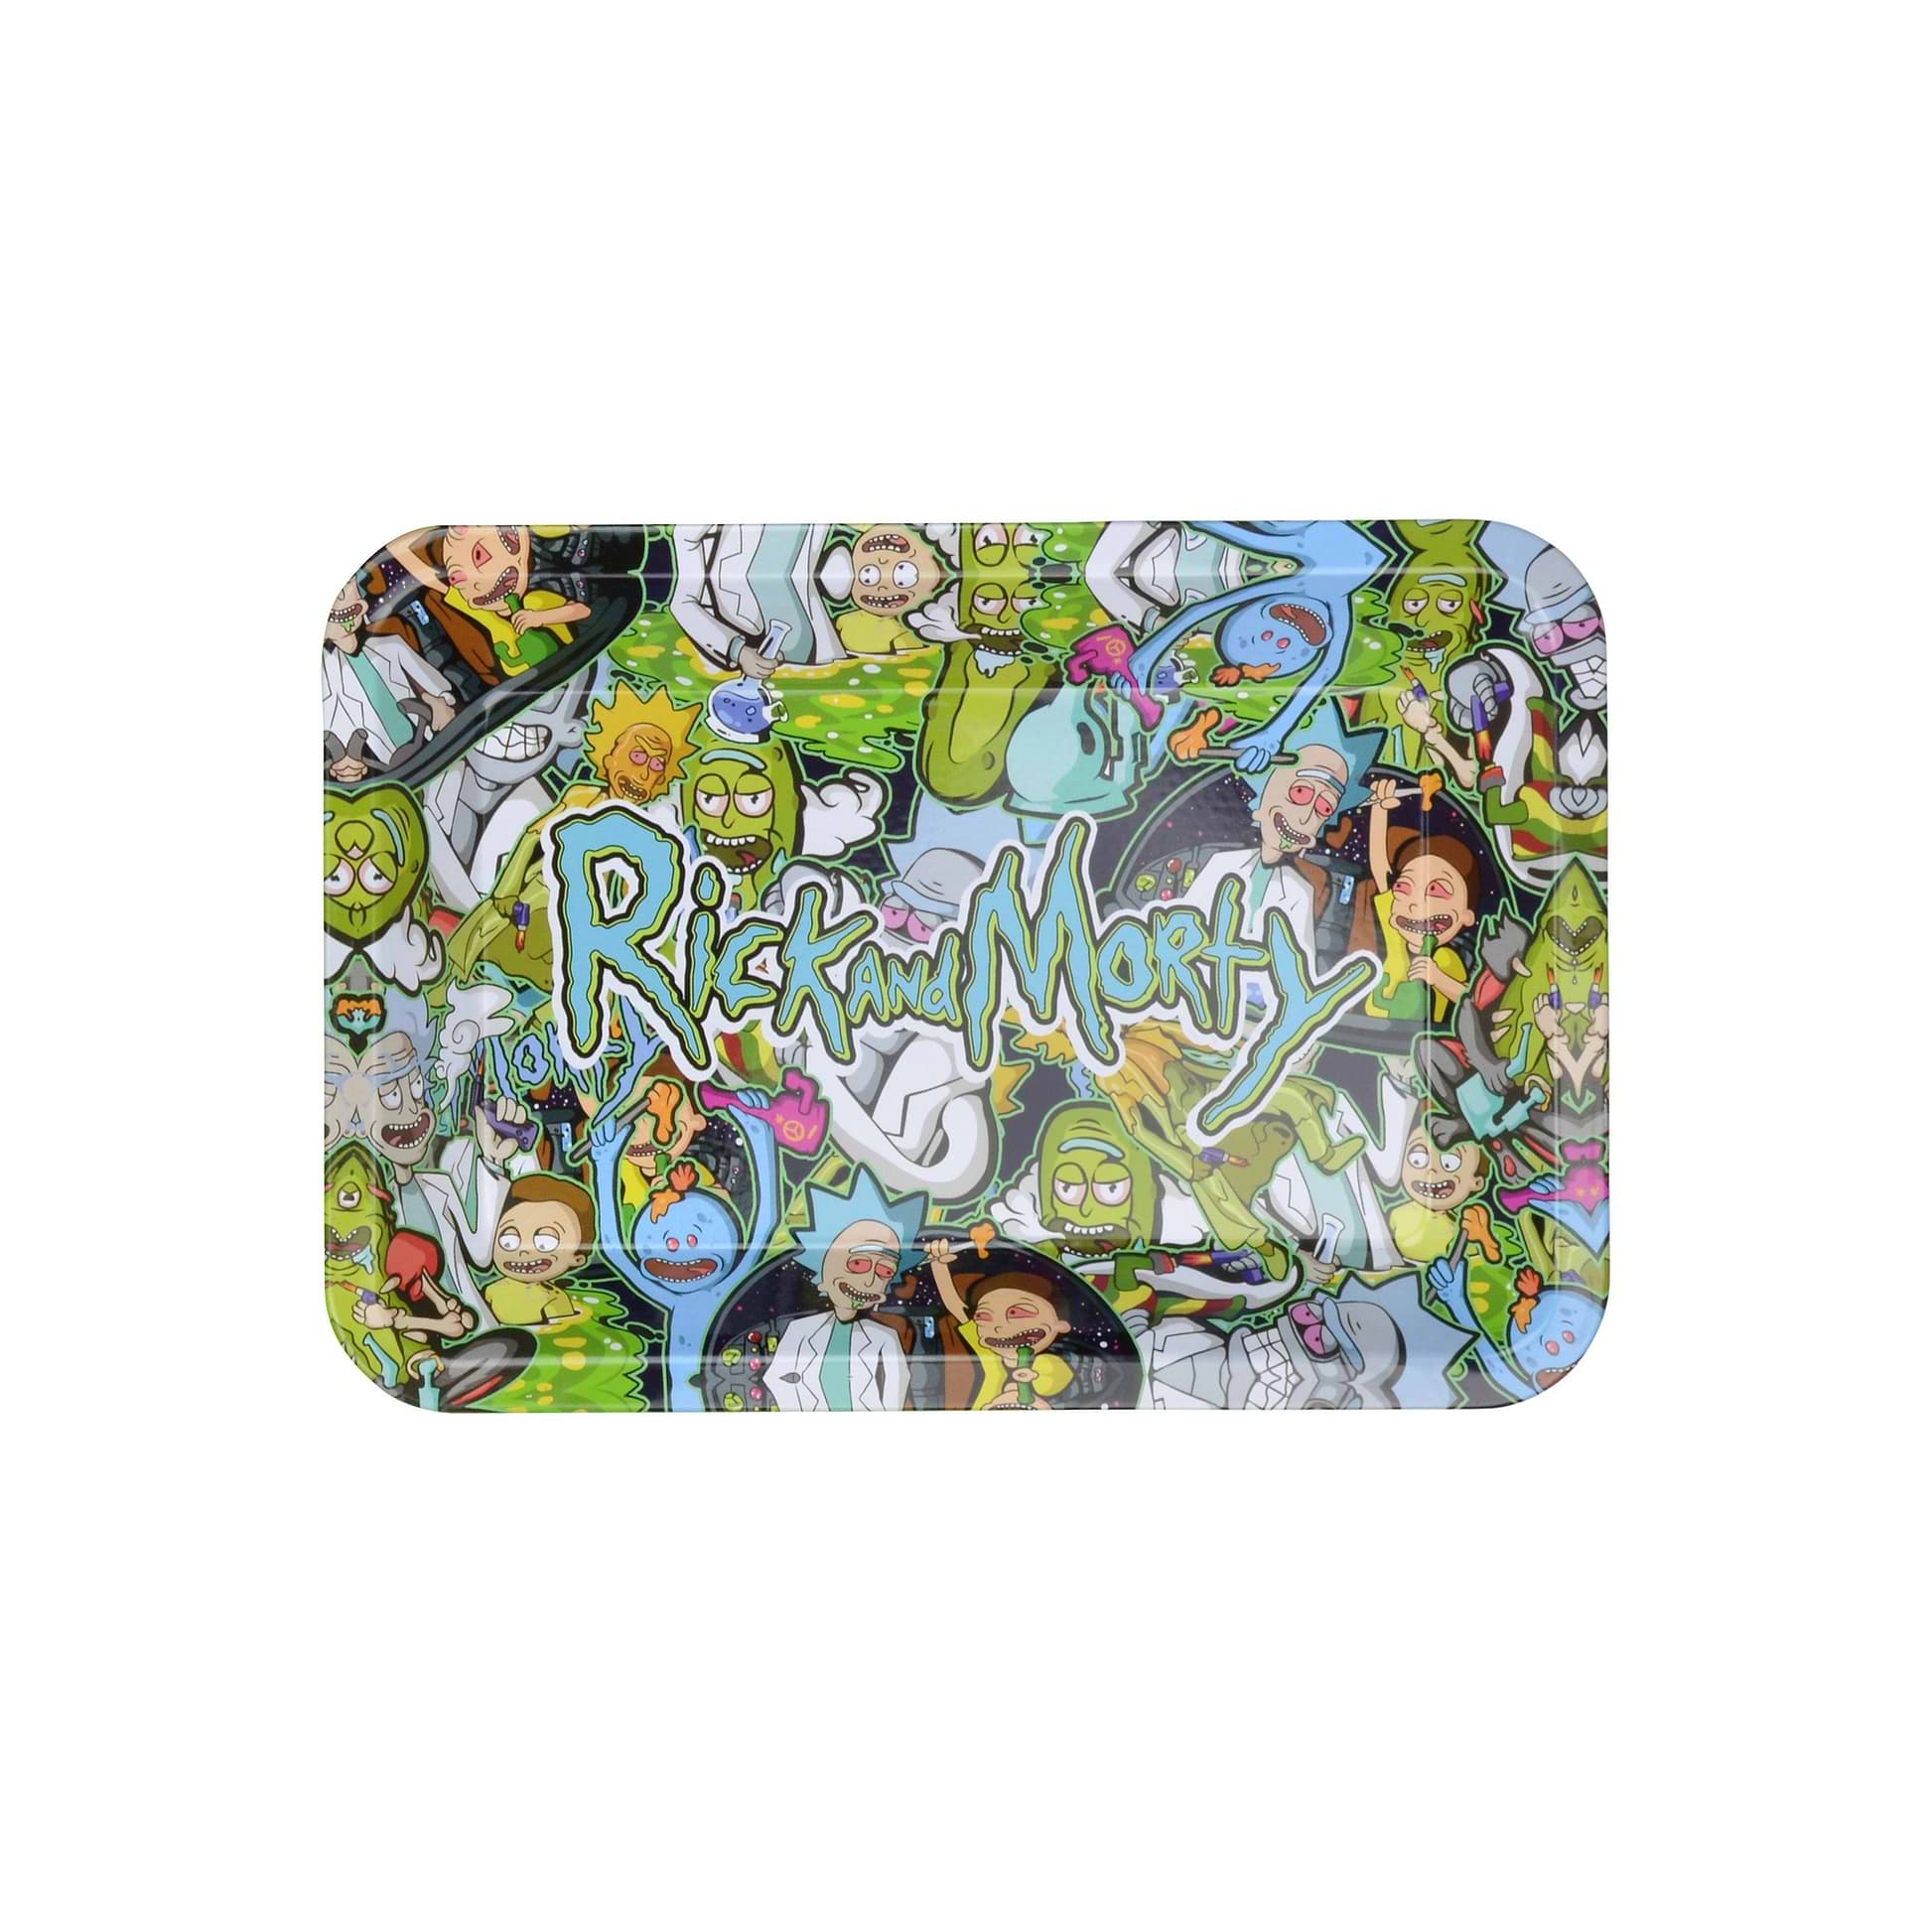 Rick and morty rolling tray